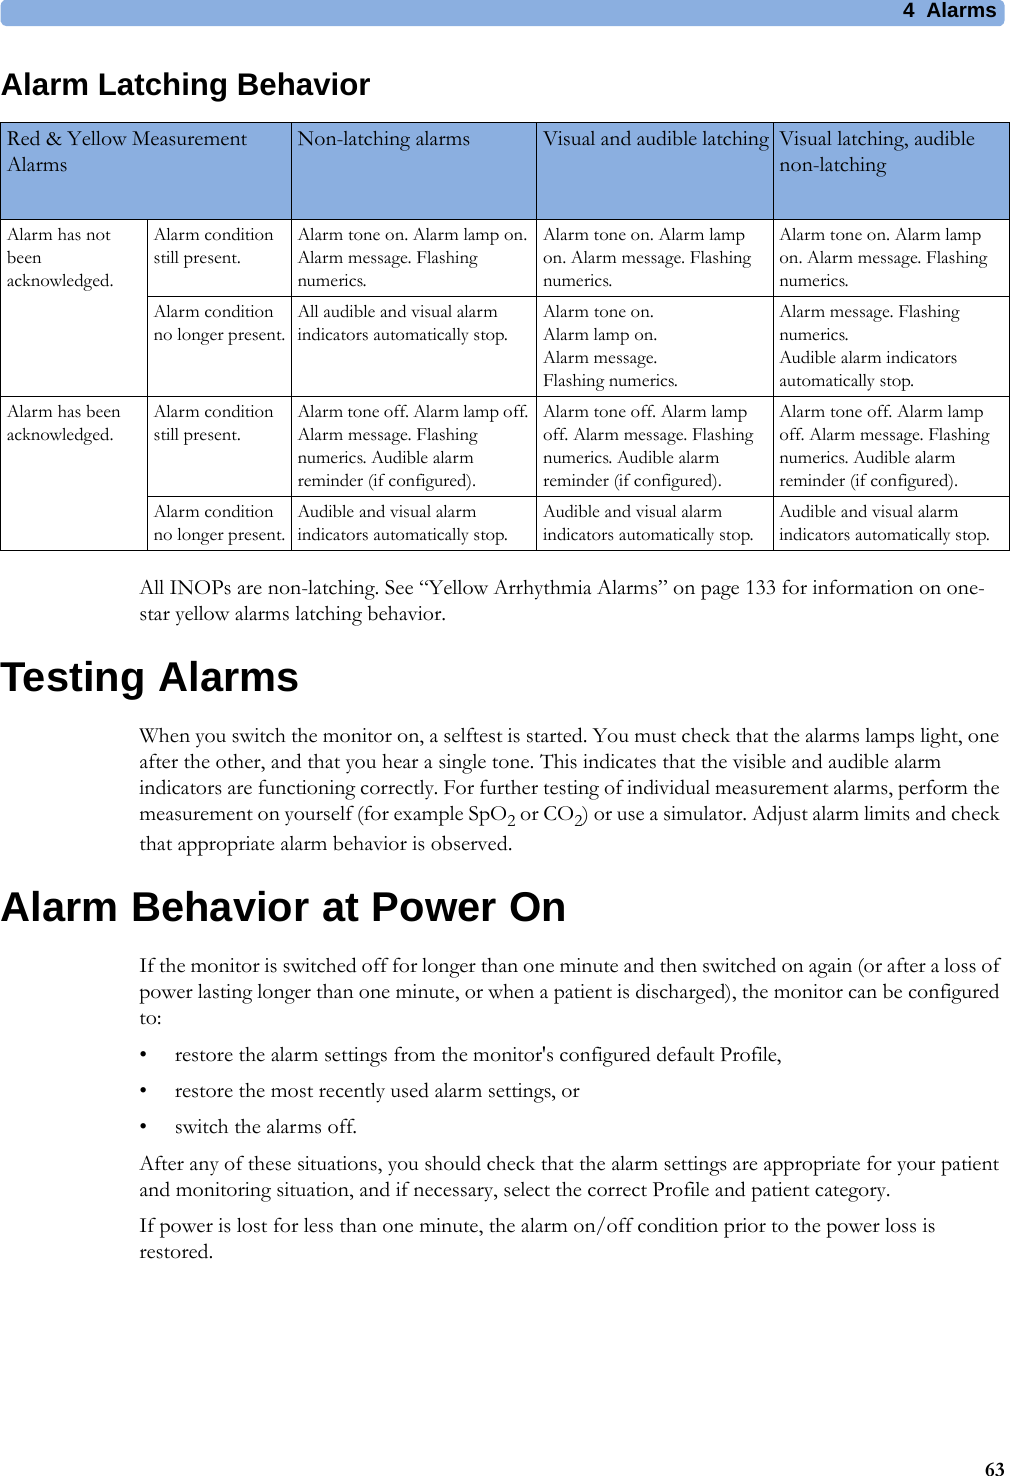 4 Alarms63Alarm Latching BehaviorAll INOPs are non-latching. See “Yellow Arrhythmia Alarms” on page 133 for information on one-star yellow alarms latching behavior.Testing AlarmsWhen you switch the monitor on, a selftest is started. You must check that the alarms lamps light, one after the other, and that you hear a single tone. This indicates that the visible and audible alarm indicators are functioning correctly. For further testing of individual measurement alarms, perform the measurement on yourself (for example SpO2 or CO2) or use a simulator. Adjust alarm limits and check that appropriate alarm behavior is observed.Alarm Behavior at Power OnIf the monitor is switched off for longer than one minute and then switched on again (or after a loss of power lasting longer than one minute, or when a patient is discharged), the monitor can be configured to:• restore the alarm settings from the monitor&apos;s configured default Profile,• restore the most recently used alarm settings, or • switch the alarms off. After any of these situations, you should check that the alarm settings are appropriate for your patient and monitoring situation, and if necessary, select the correct Profile and patient category.If power is lost for less than one minute, the alarm on/off condition prior to the power loss is restored.Red &amp; Yellow Measurement AlarmsNon-latching alarms Visual and audible latching Visual latching, audible non-latchingAlarm has not been acknowledged.Alarm condition still present.Alarm tone on. Alarm lamp on. Alarm message. Flashing numerics.Alarm tone on. Alarm lamp on. Alarm message. Flashing numerics.Alarm tone on. Alarm lamp on. Alarm message. Flashing numerics.Alarm condition no longer present.All audible and visual alarm indicators automatically stop.Alarm tone on.Alarm lamp on. Alarm message. Flashing numerics.Alarm message. Flashing numerics.Audible alarm indicators automatically stop.Alarm has been acknowledged.Alarm condition still present.Alarm tone off. Alarm lamp off. Alarm message. Flashing numerics. Audible alarm reminder (if configured).Alarm tone off. Alarm lamp off. Alarm message. Flashing numerics. Audible alarm reminder (if configured).Alarm tone off. Alarm lamp off. Alarm message. Flashing numerics. Audible alarm reminder (if configured).Alarm condition no longer present.Audible and visual alarm indicators automatically stop.Audible and visual alarm indicators automatically stop.Audible and visual alarm indicators automatically stop.